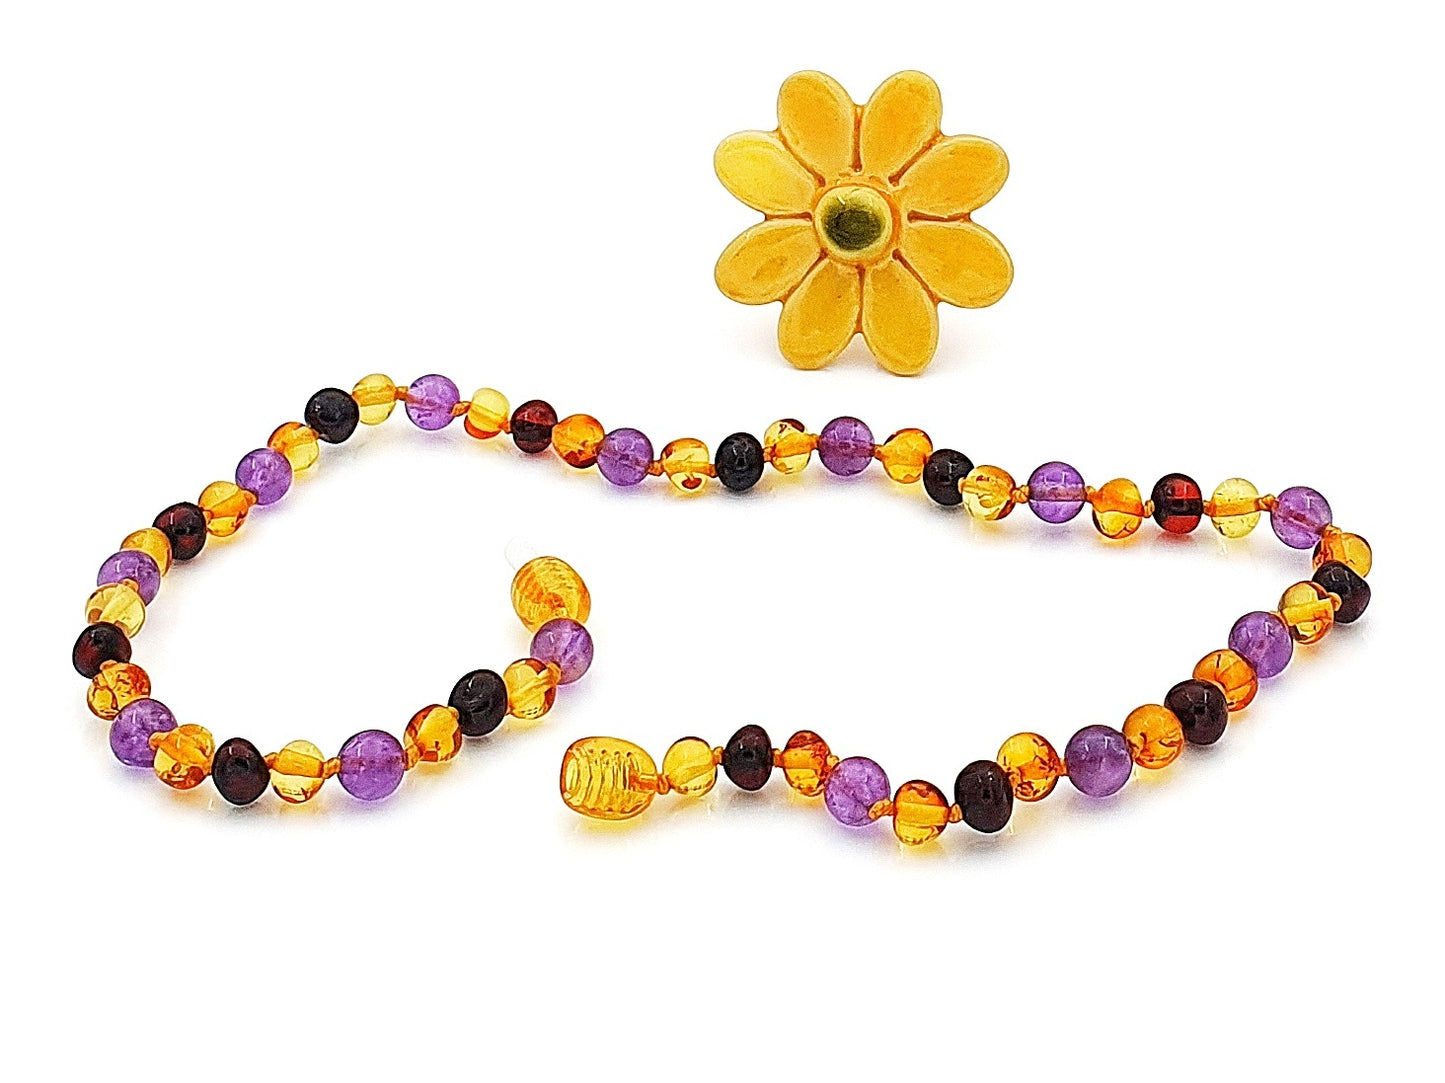 Baltic amber teething necklace necklace with amethyst